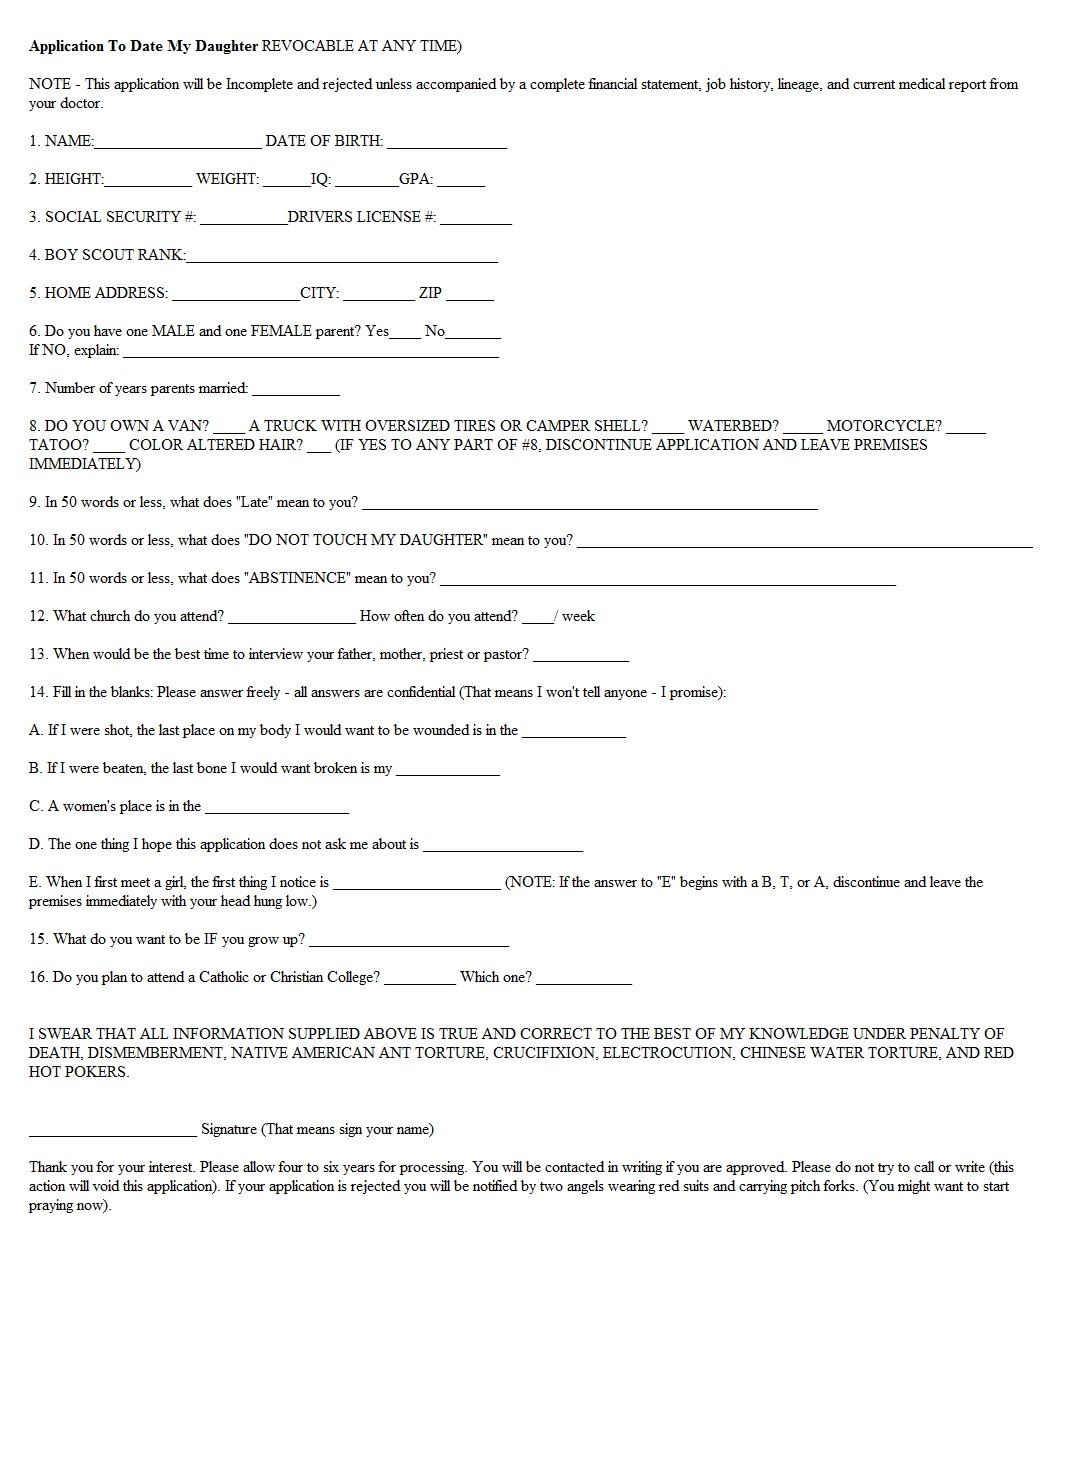 Dating application